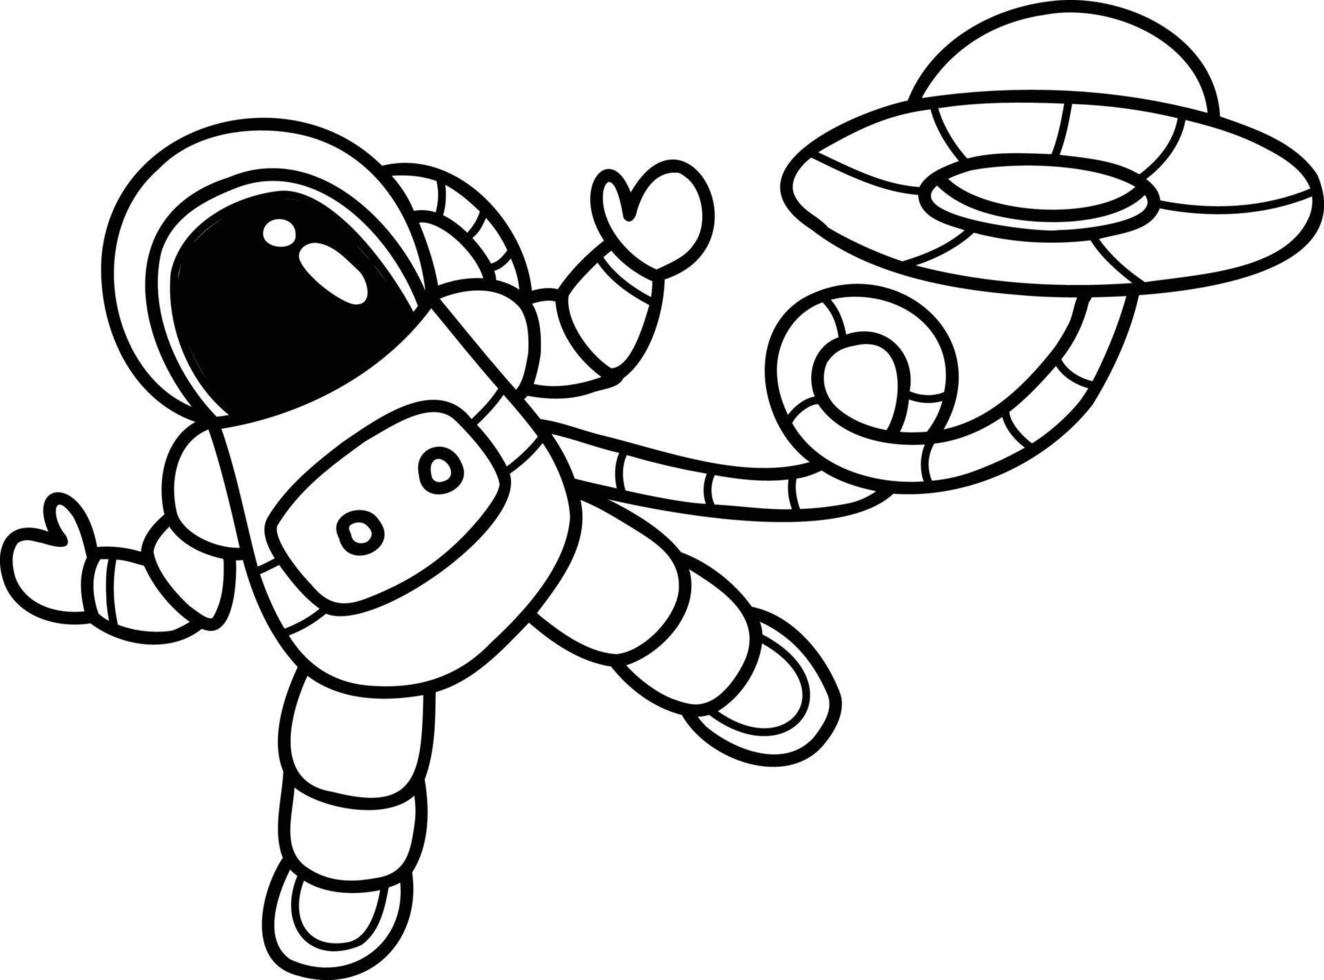 Hand Drawn astronaut floating in space illustration vector